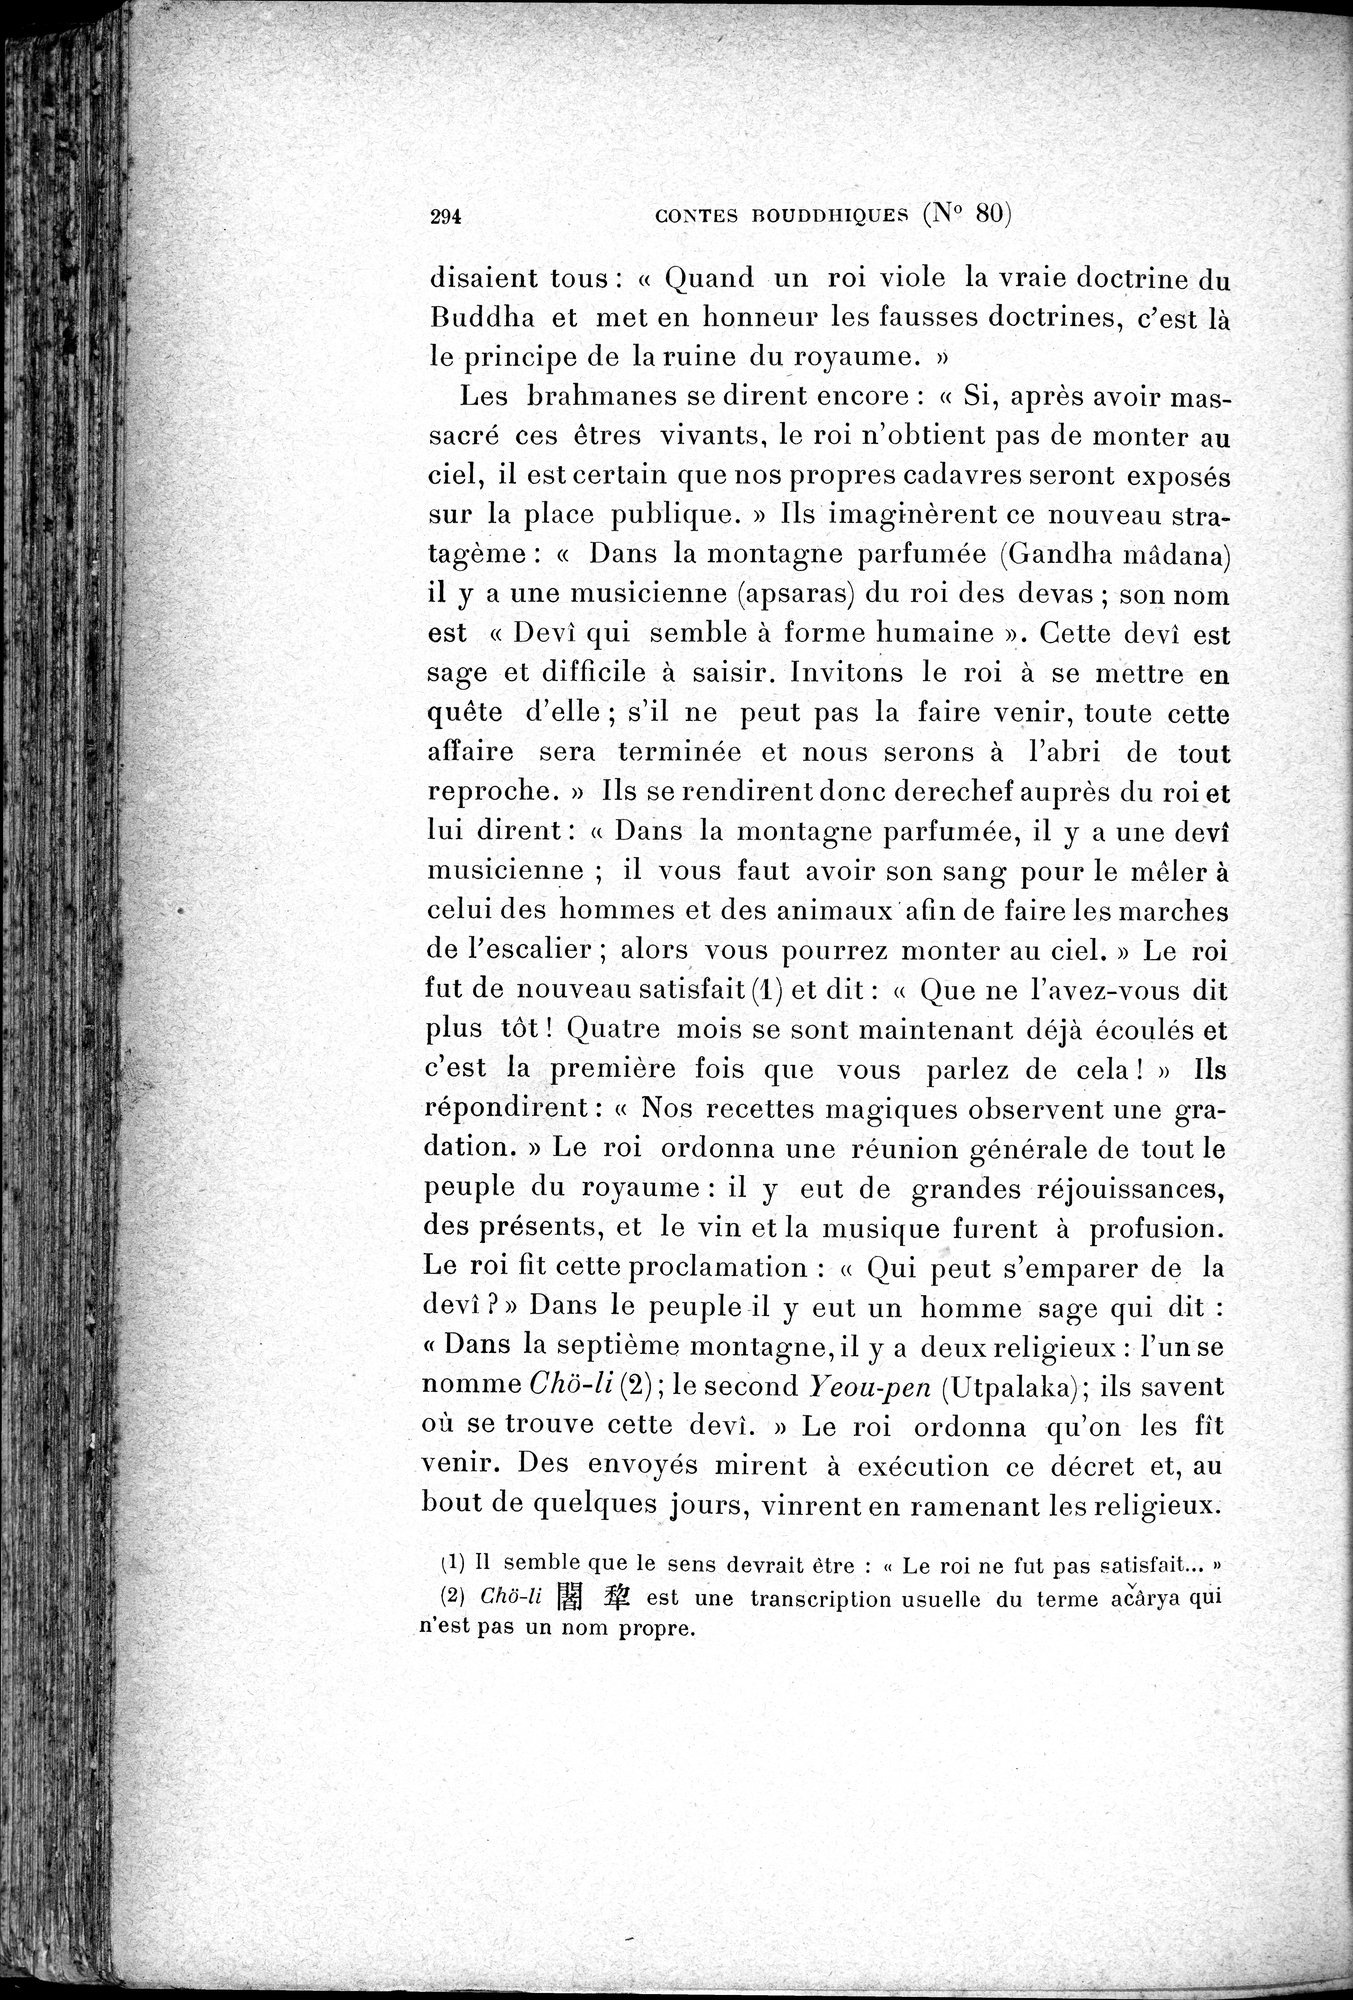 Cinq Cents Contes et Apologues : vol.1 / Page 328 (Grayscale High Resolution Image)